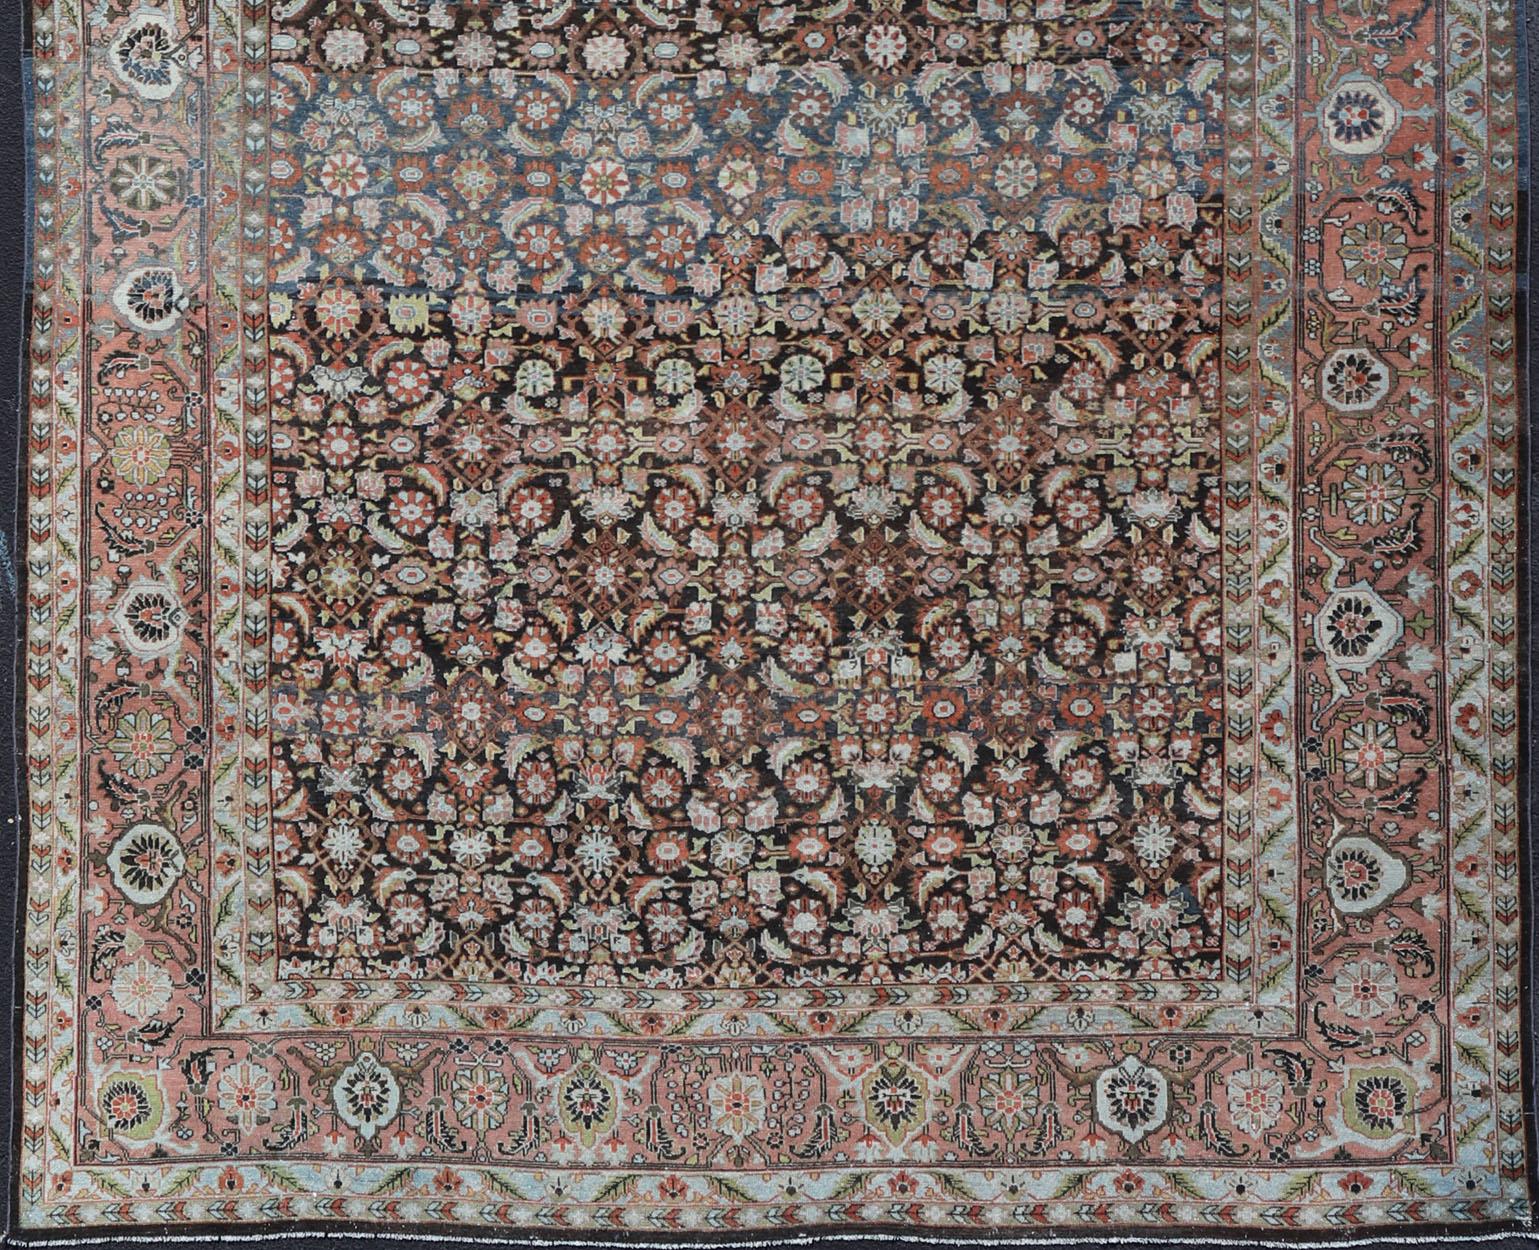 Early 20th century antique Persian Malayer rug in variegated charcoal, brown, green and blue background and salmon border
A very fine antique Persian Malayer rug with all-over design Keivan Woven Arts/rug R20-0102, country of origin / type: Iran /